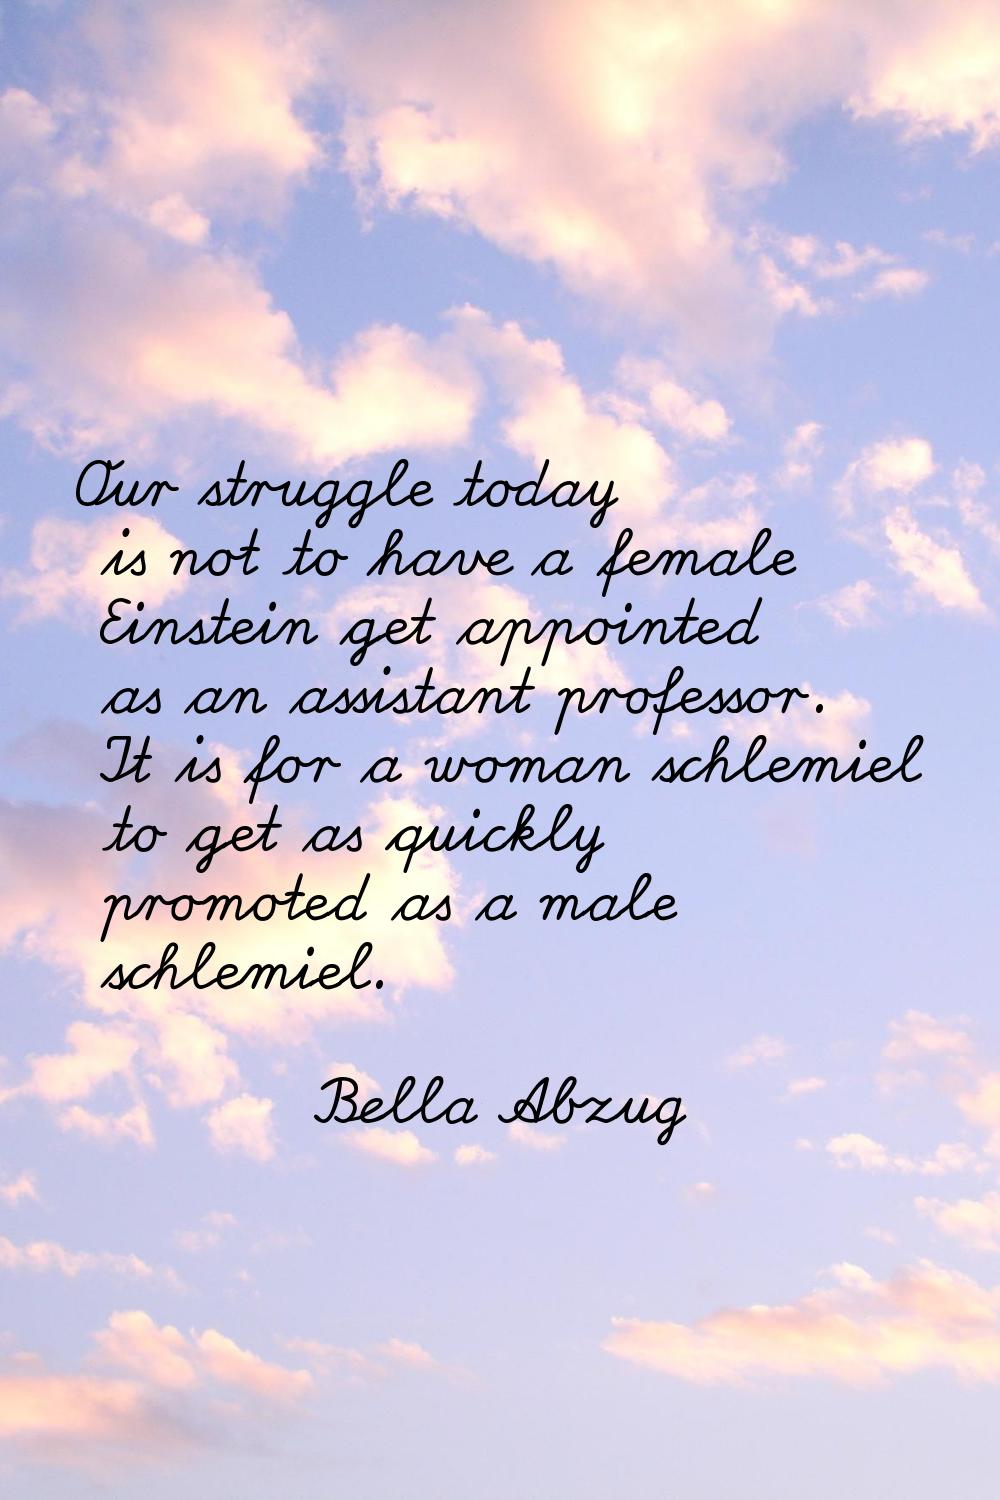 Our struggle today is not to have a female Einstein get appointed as an assistant professor. It is 